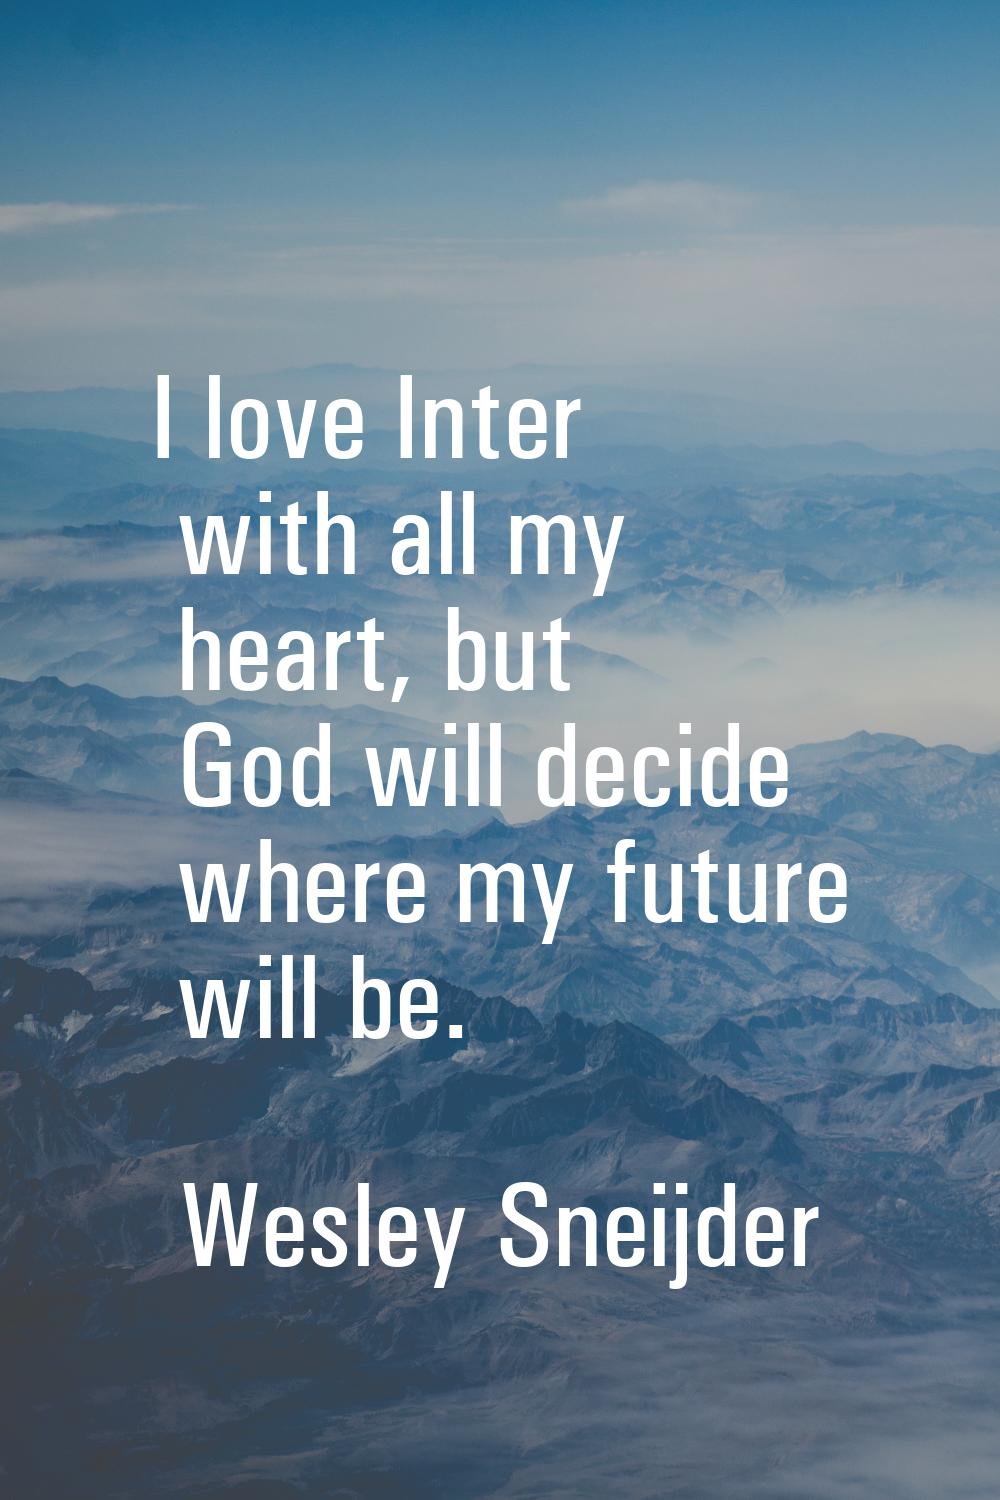 I love Inter with all my heart, but God will decide where my future will be.